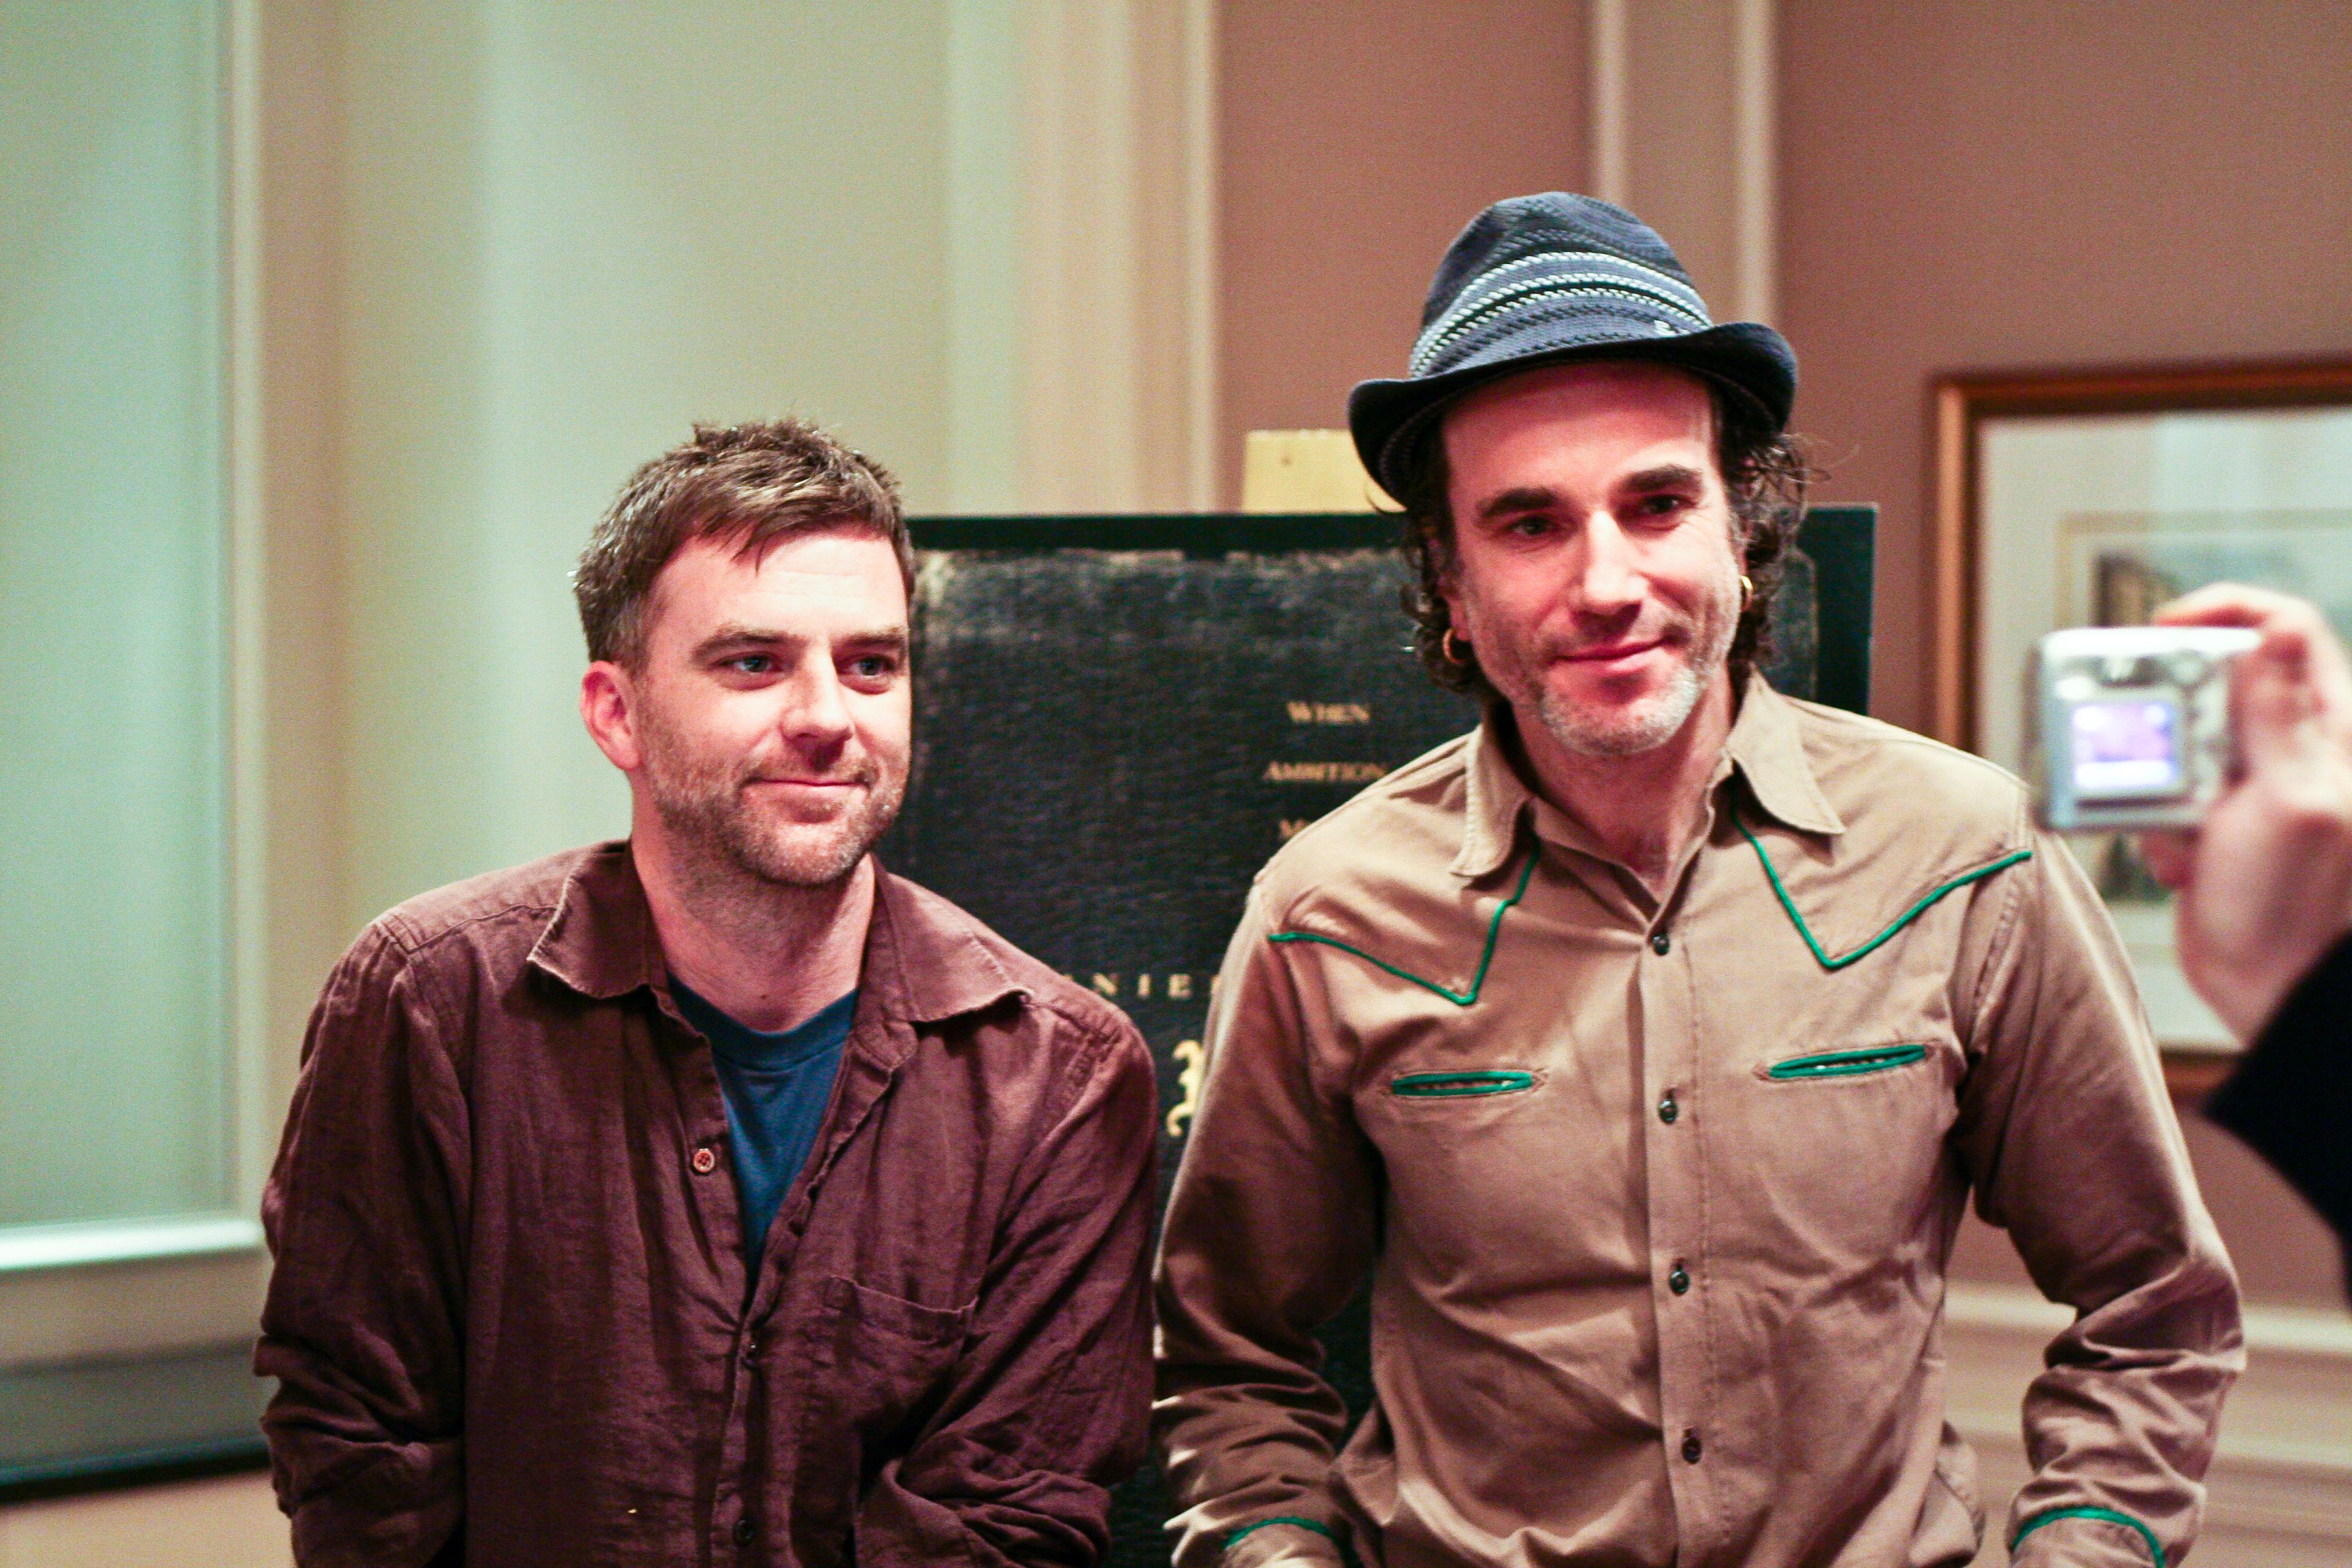 Paul Thomas Anderson and Daniel Day-Lewis